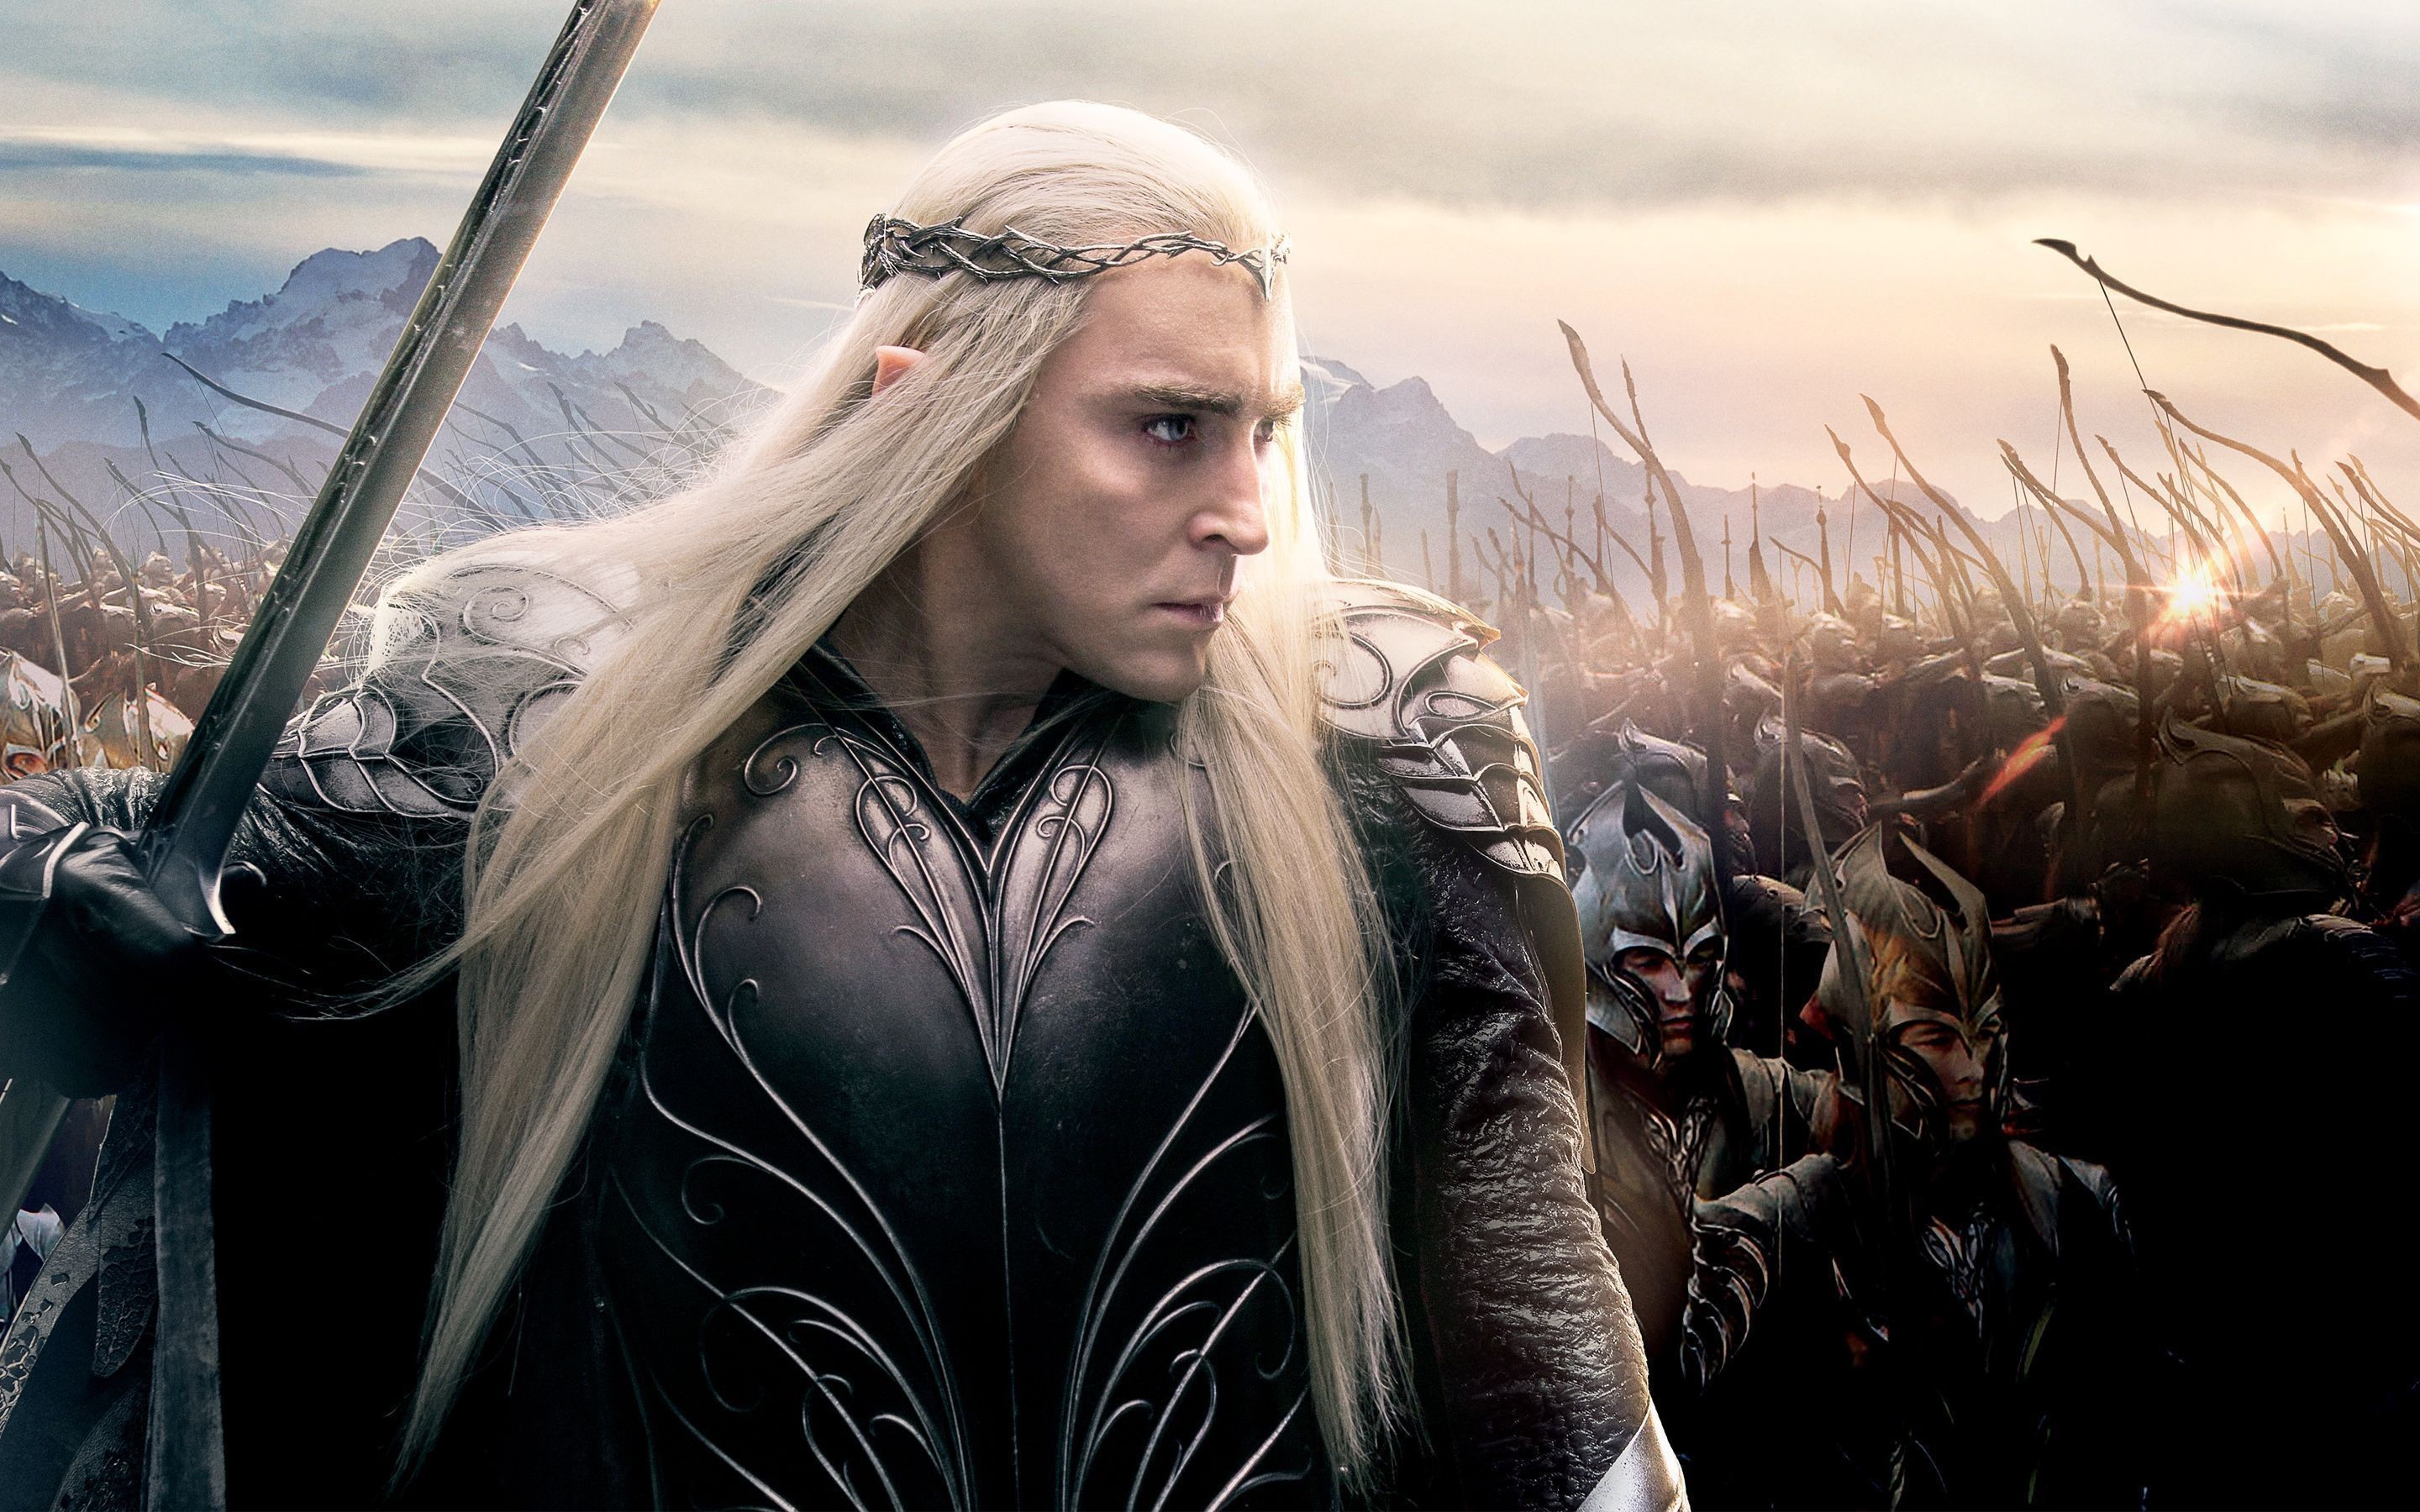 2880x1800 1920x1080 Movie - The Hobbit: The Battle of the Five Armies Wallpaper